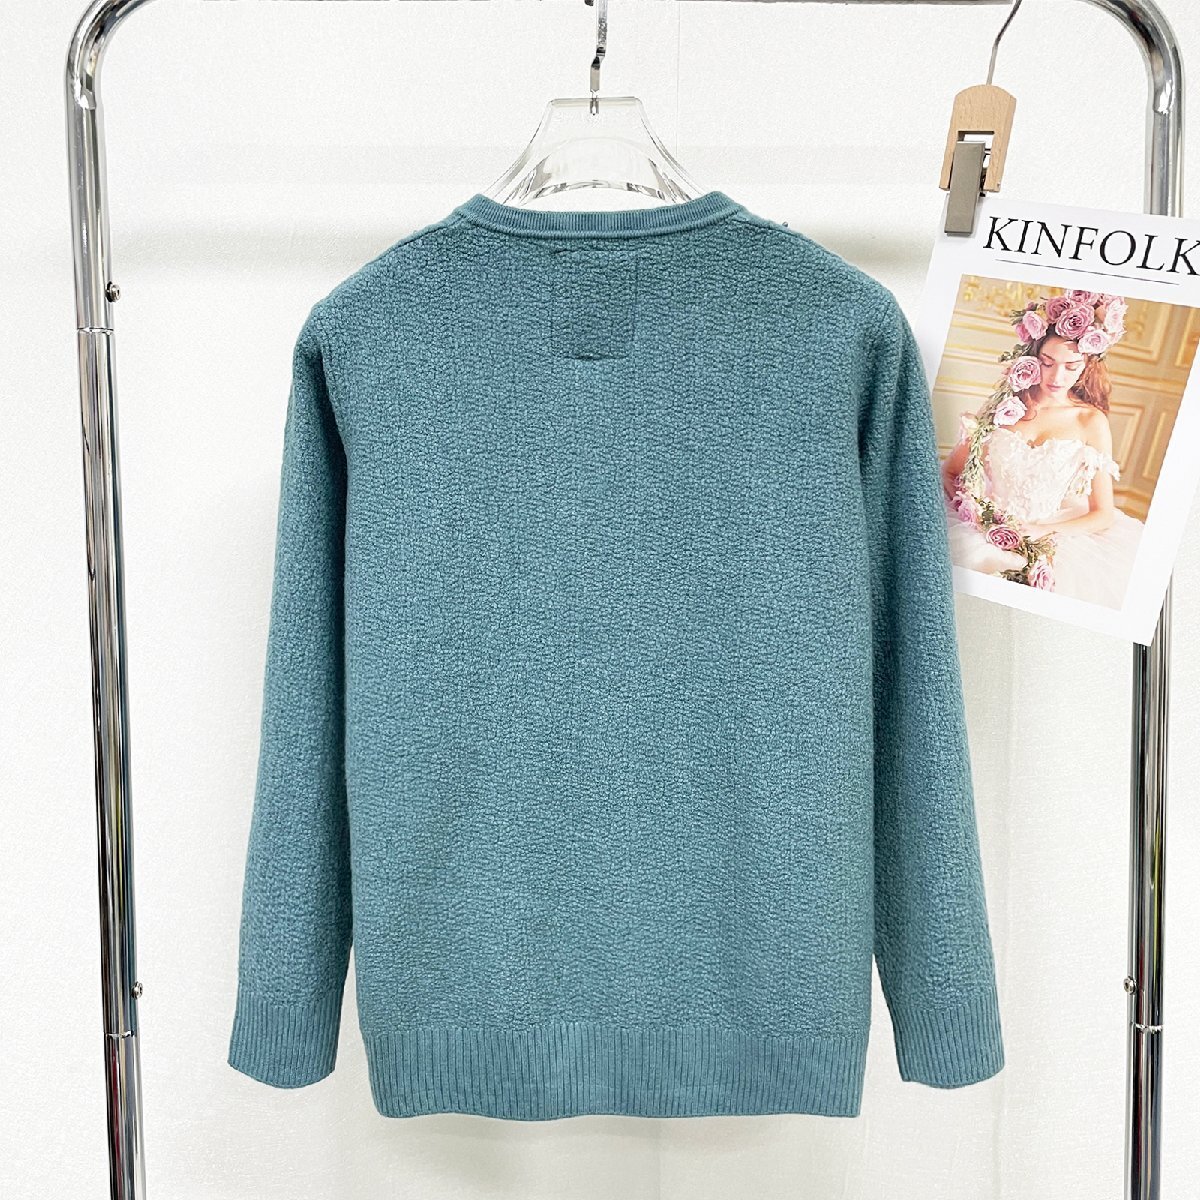  standard Europe made * regular price 5 ten thousand * BVLGARY a departure *RISELIN sweater on goods wool . protection against cold soft comfortable knitted tops beautiful lady's XL/50